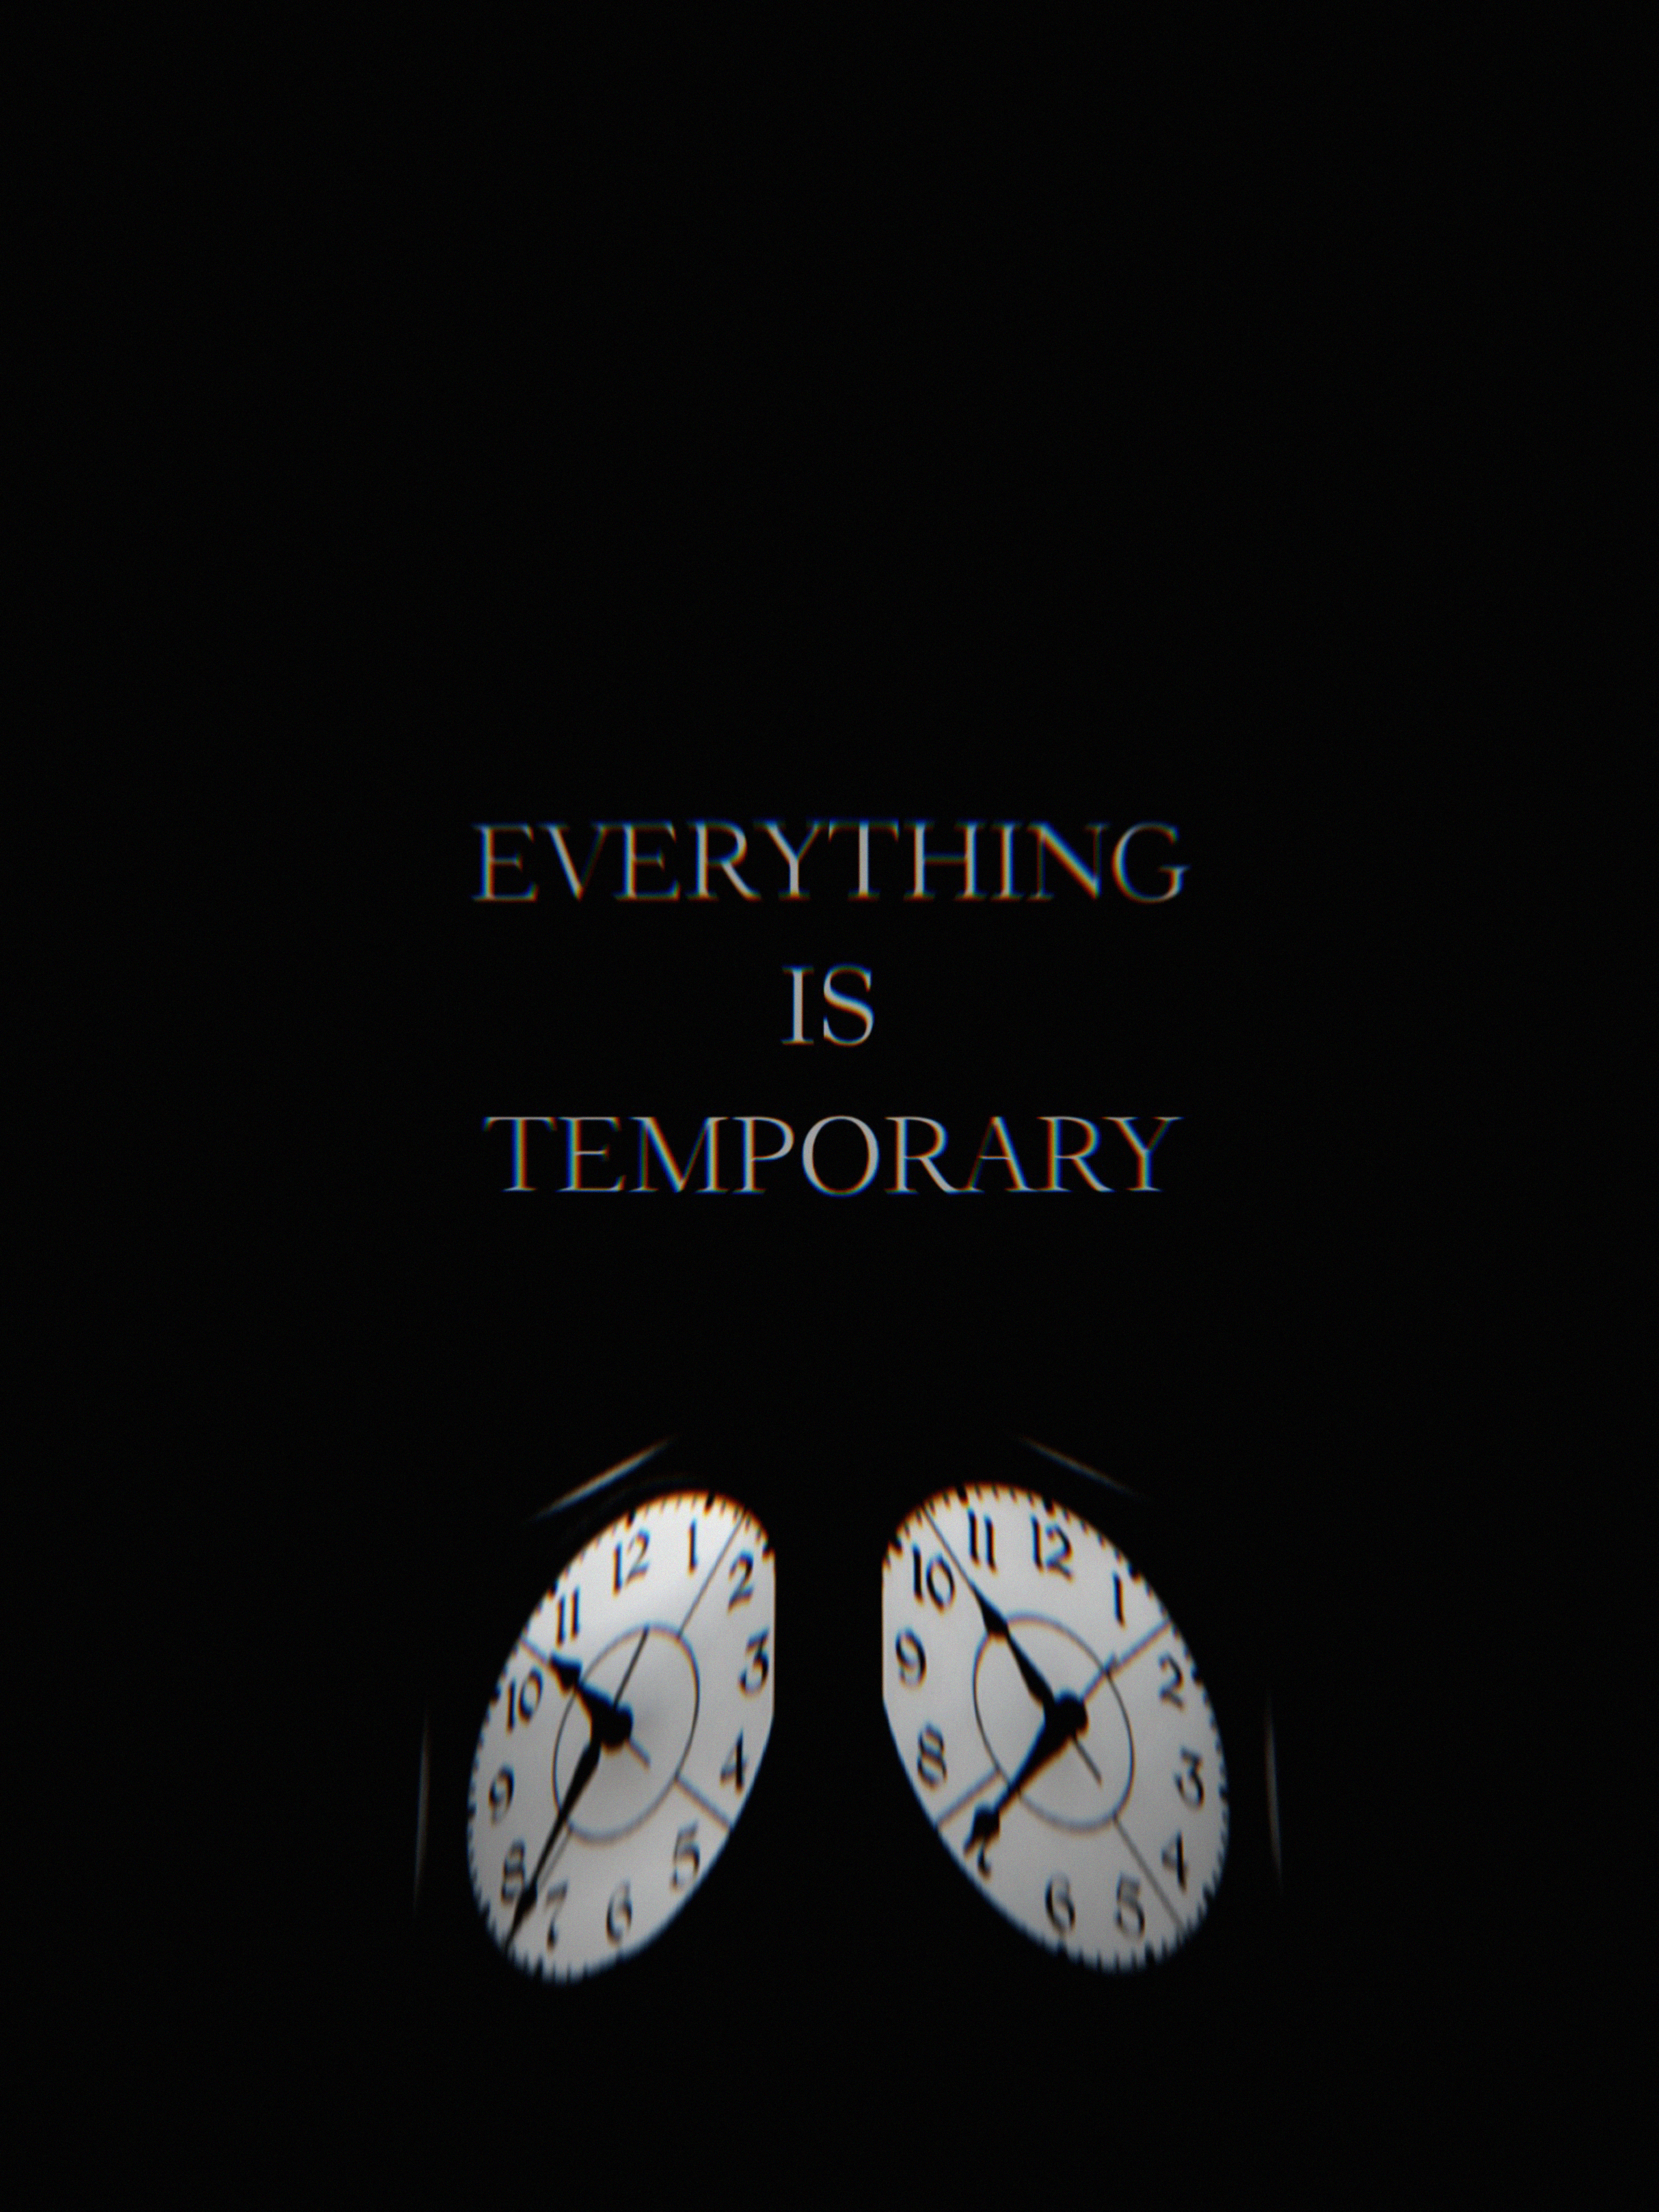 it's time, words, life, clock, time, glitch, temporary